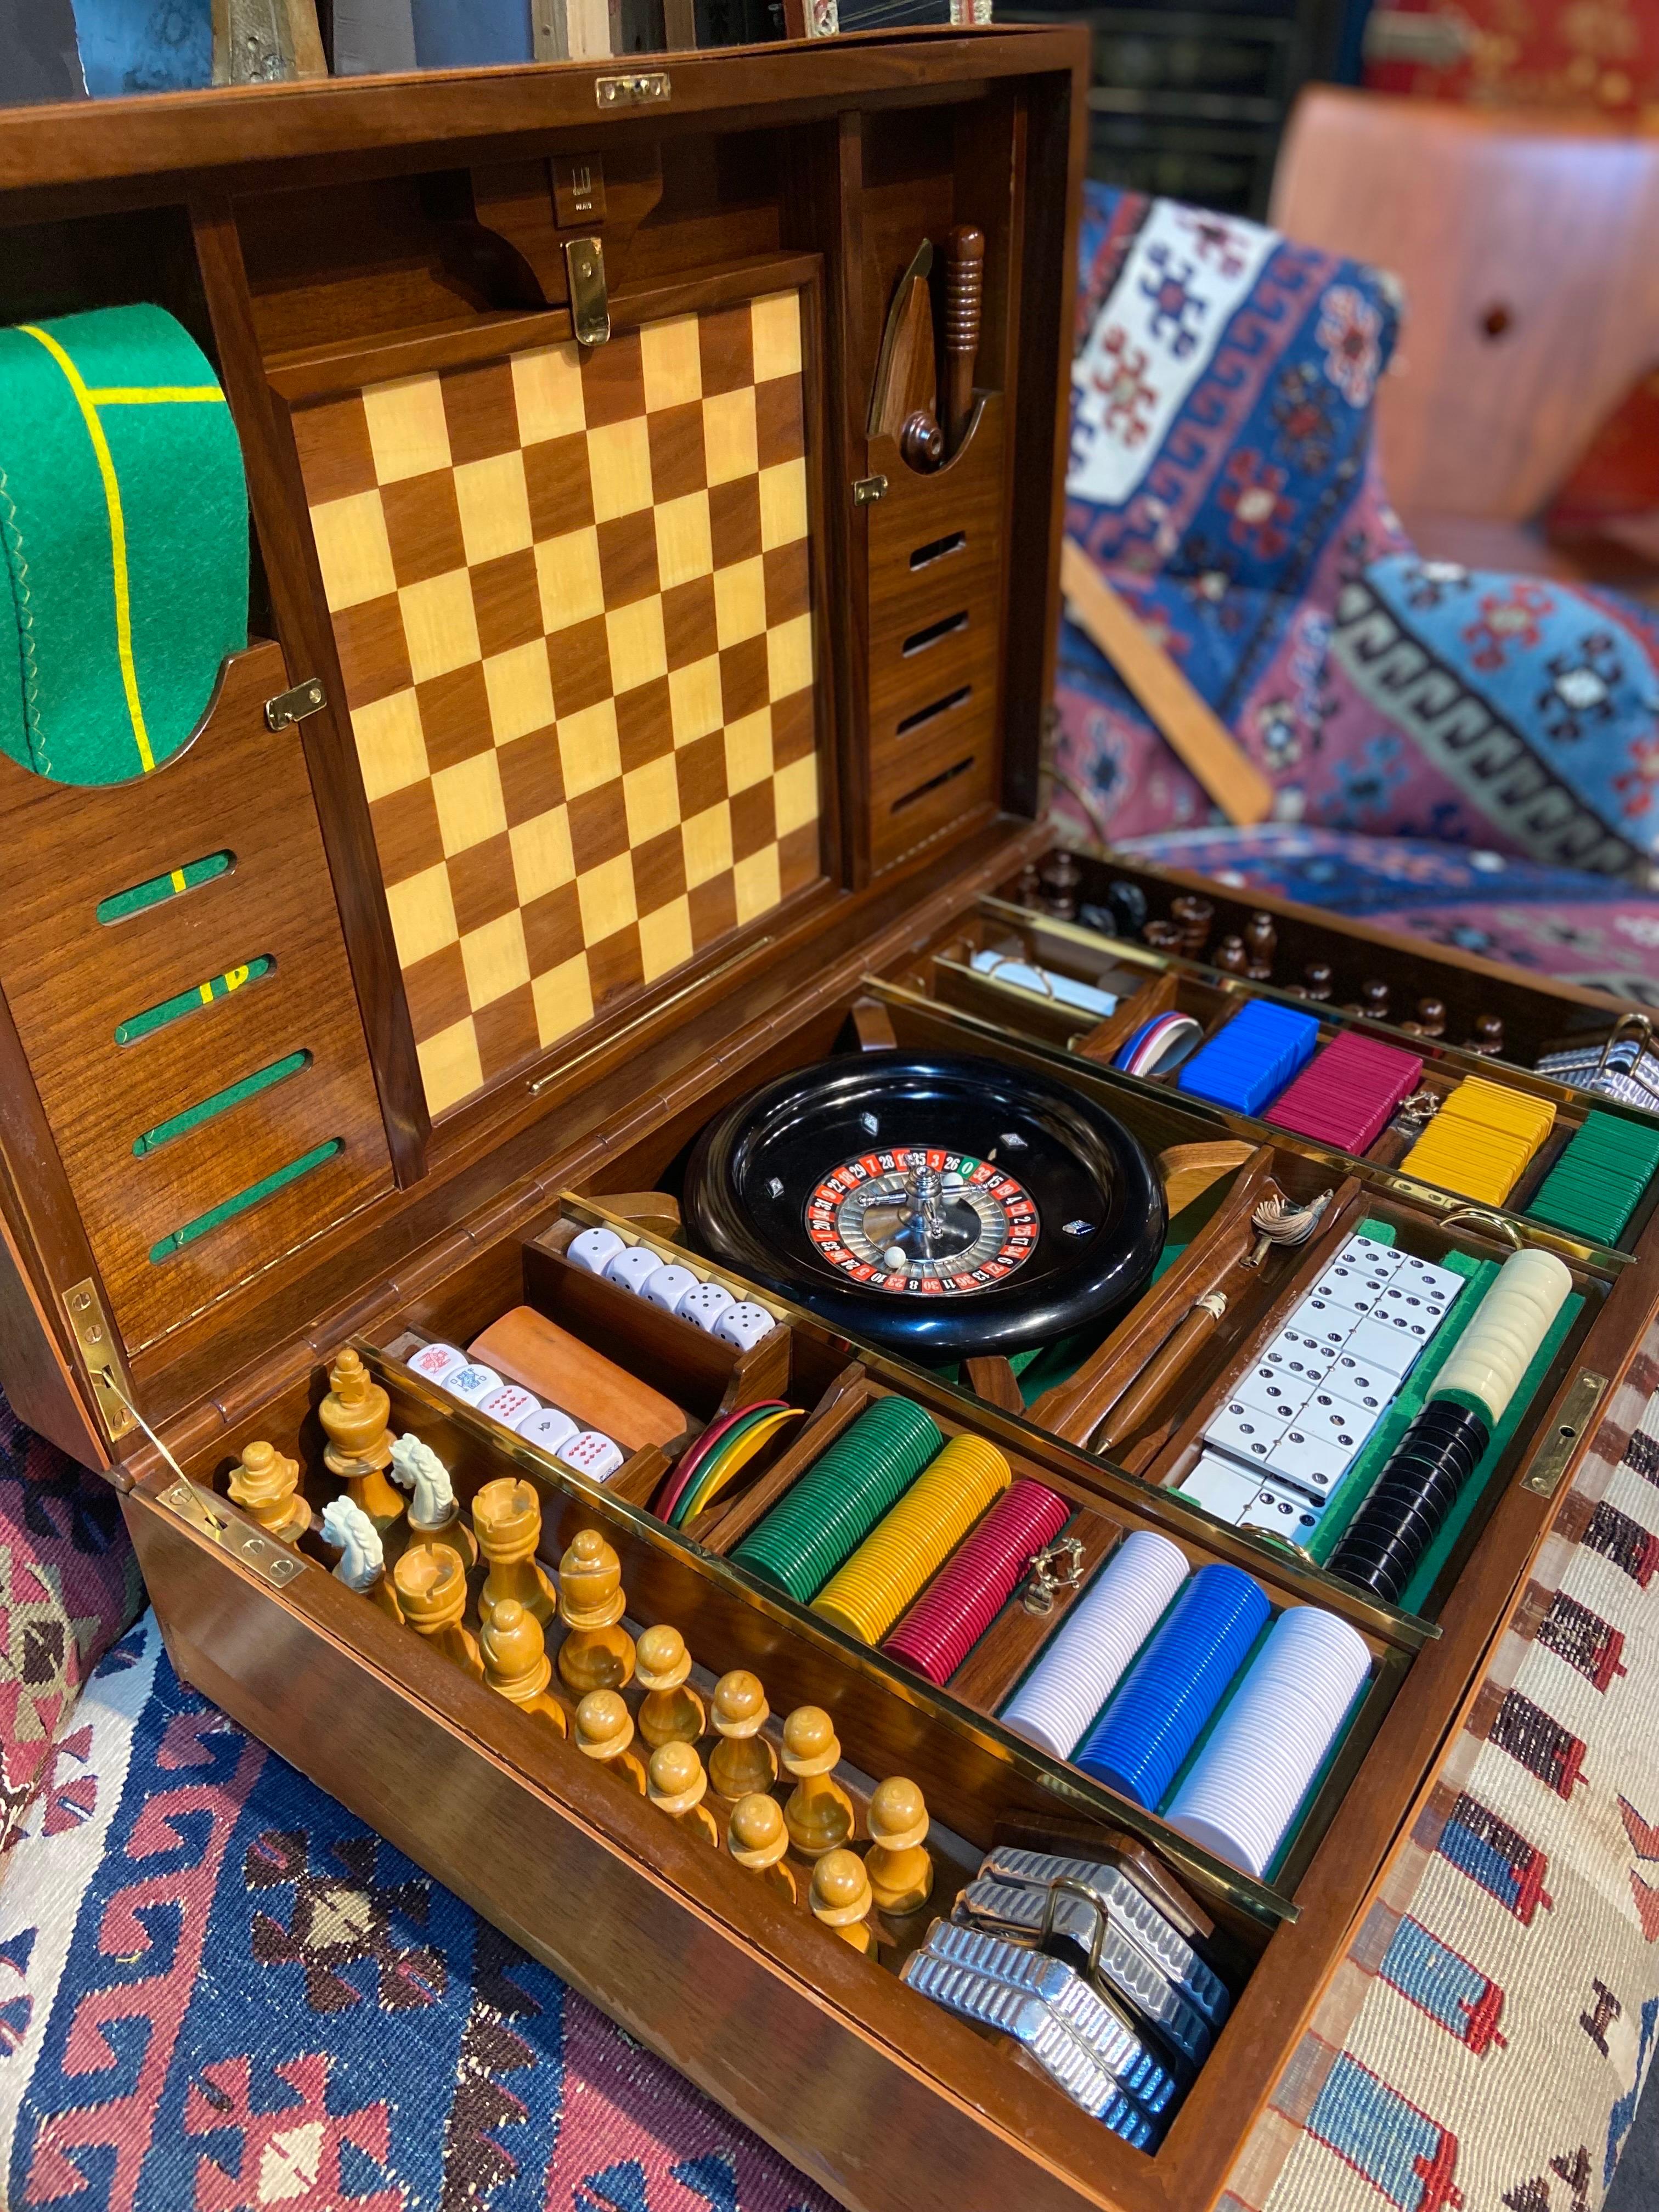 20th Century luxurious French game set by Alfred Dunhill.
The set contains different type of gambling games which are perfectly arranged in a luxury mahogany box. There are no missing pieces and the entire set is in very good condition. 
France,